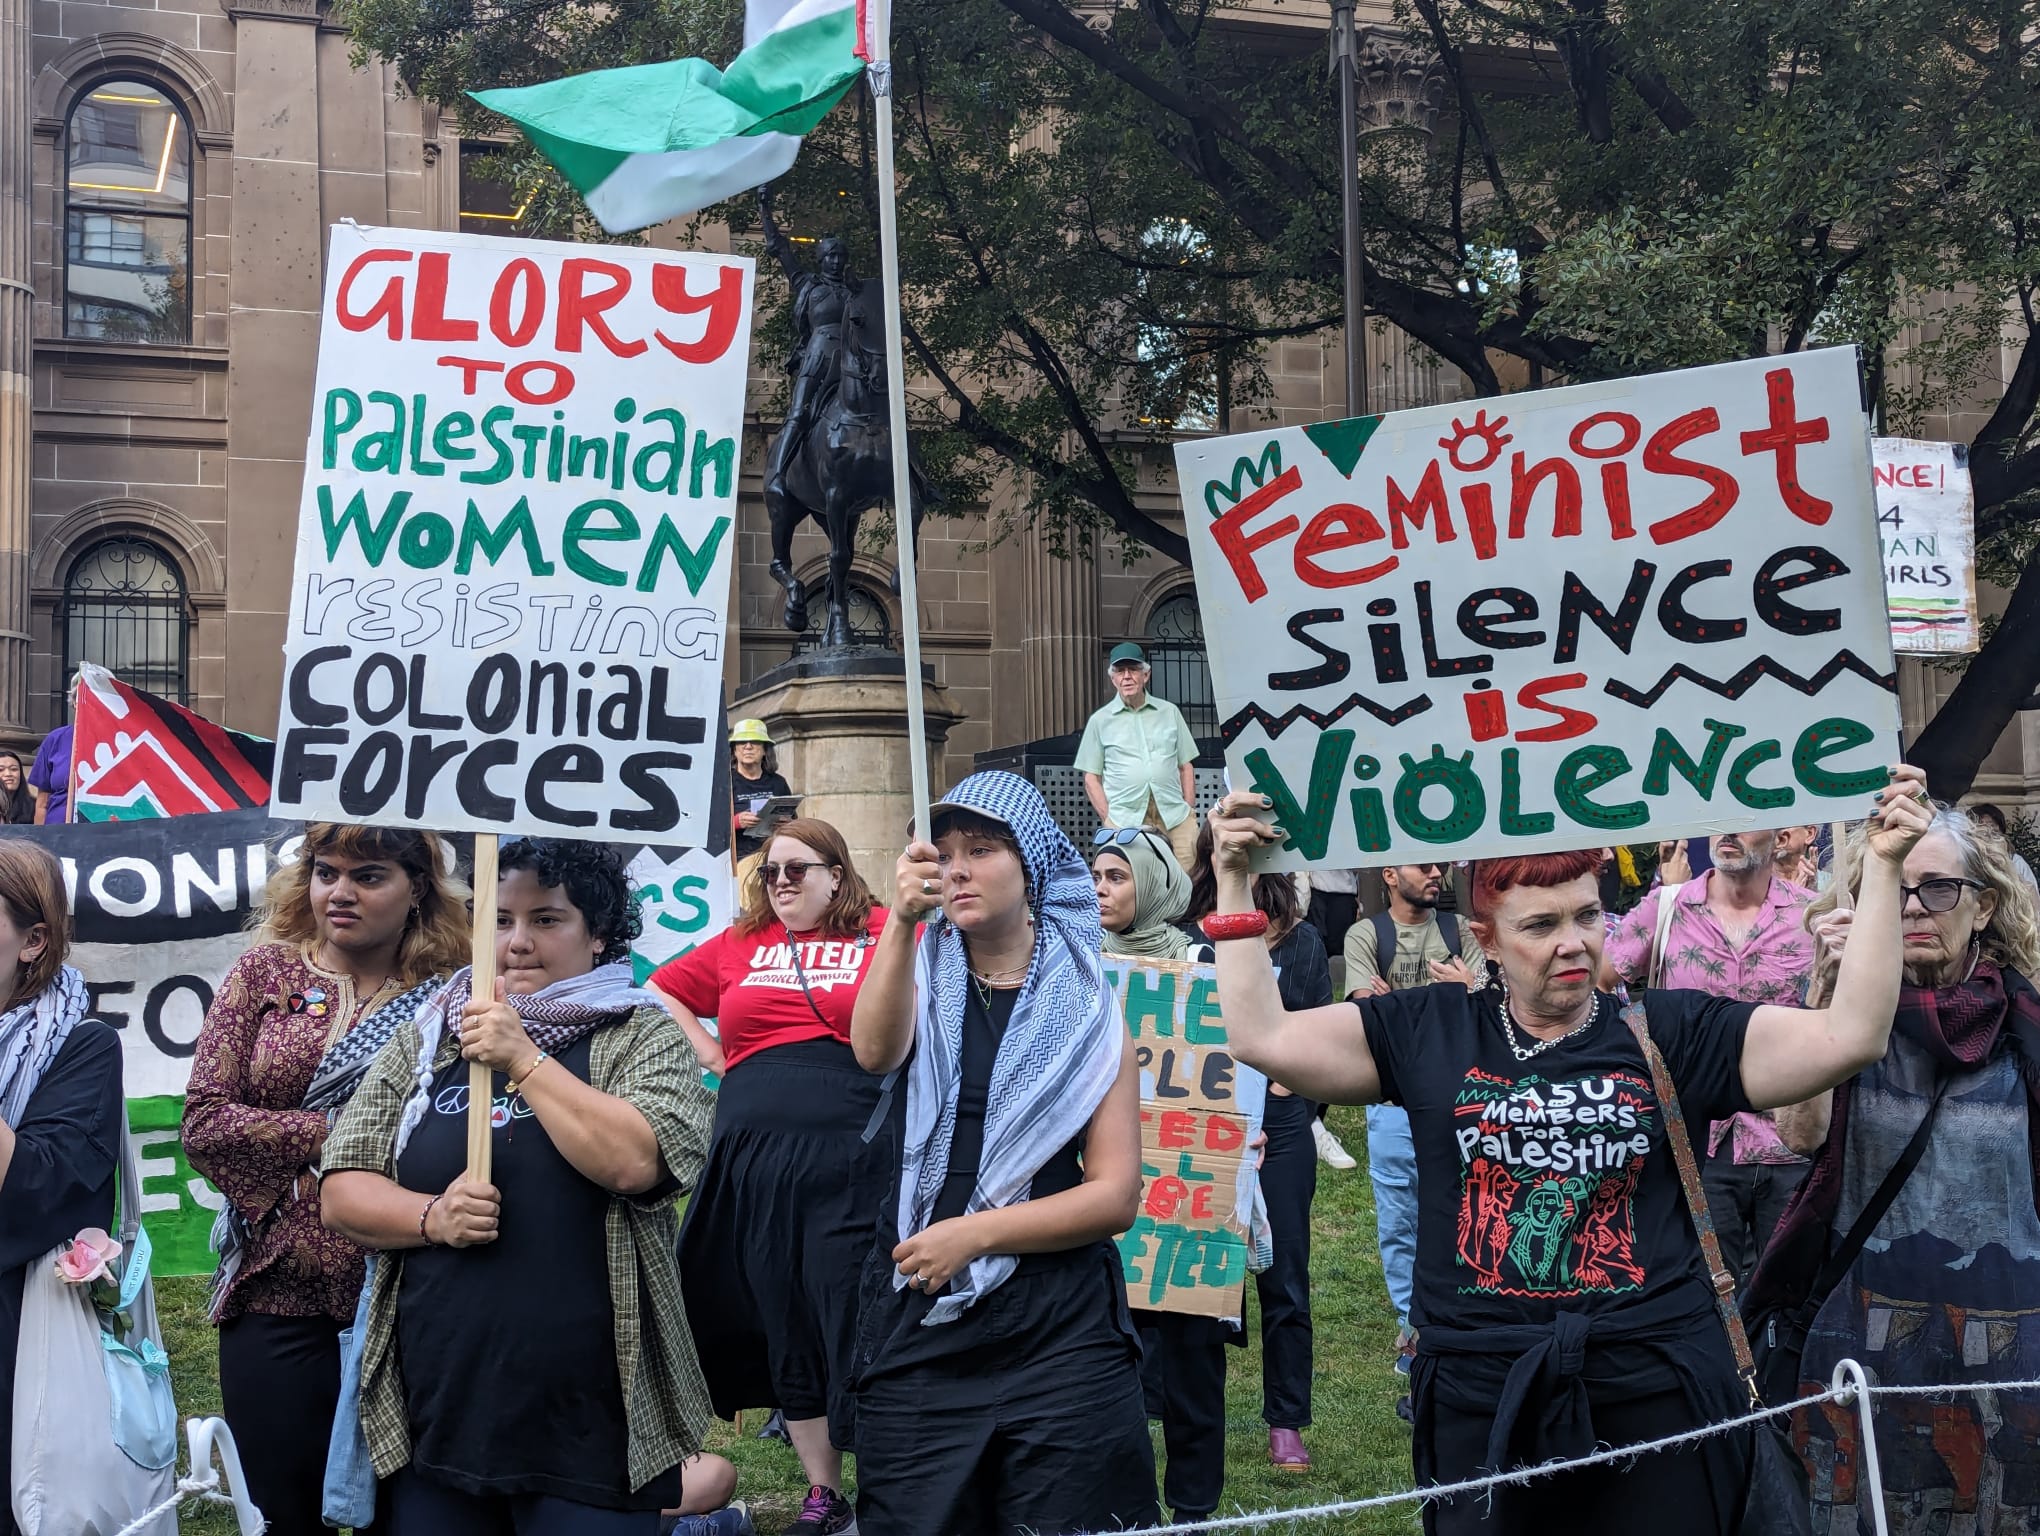 Palestine solidarity contingent at the International Women's Day march in Naarm/Melbourne.